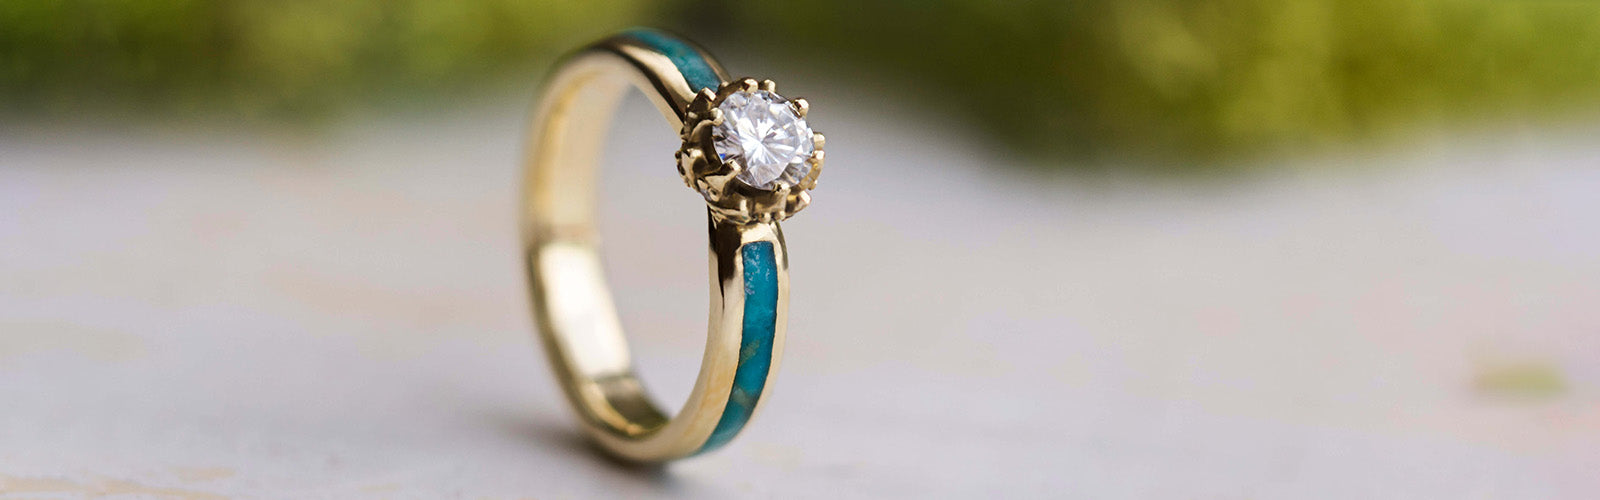 Turquoise Engagement Rings from Jewelry by Johan